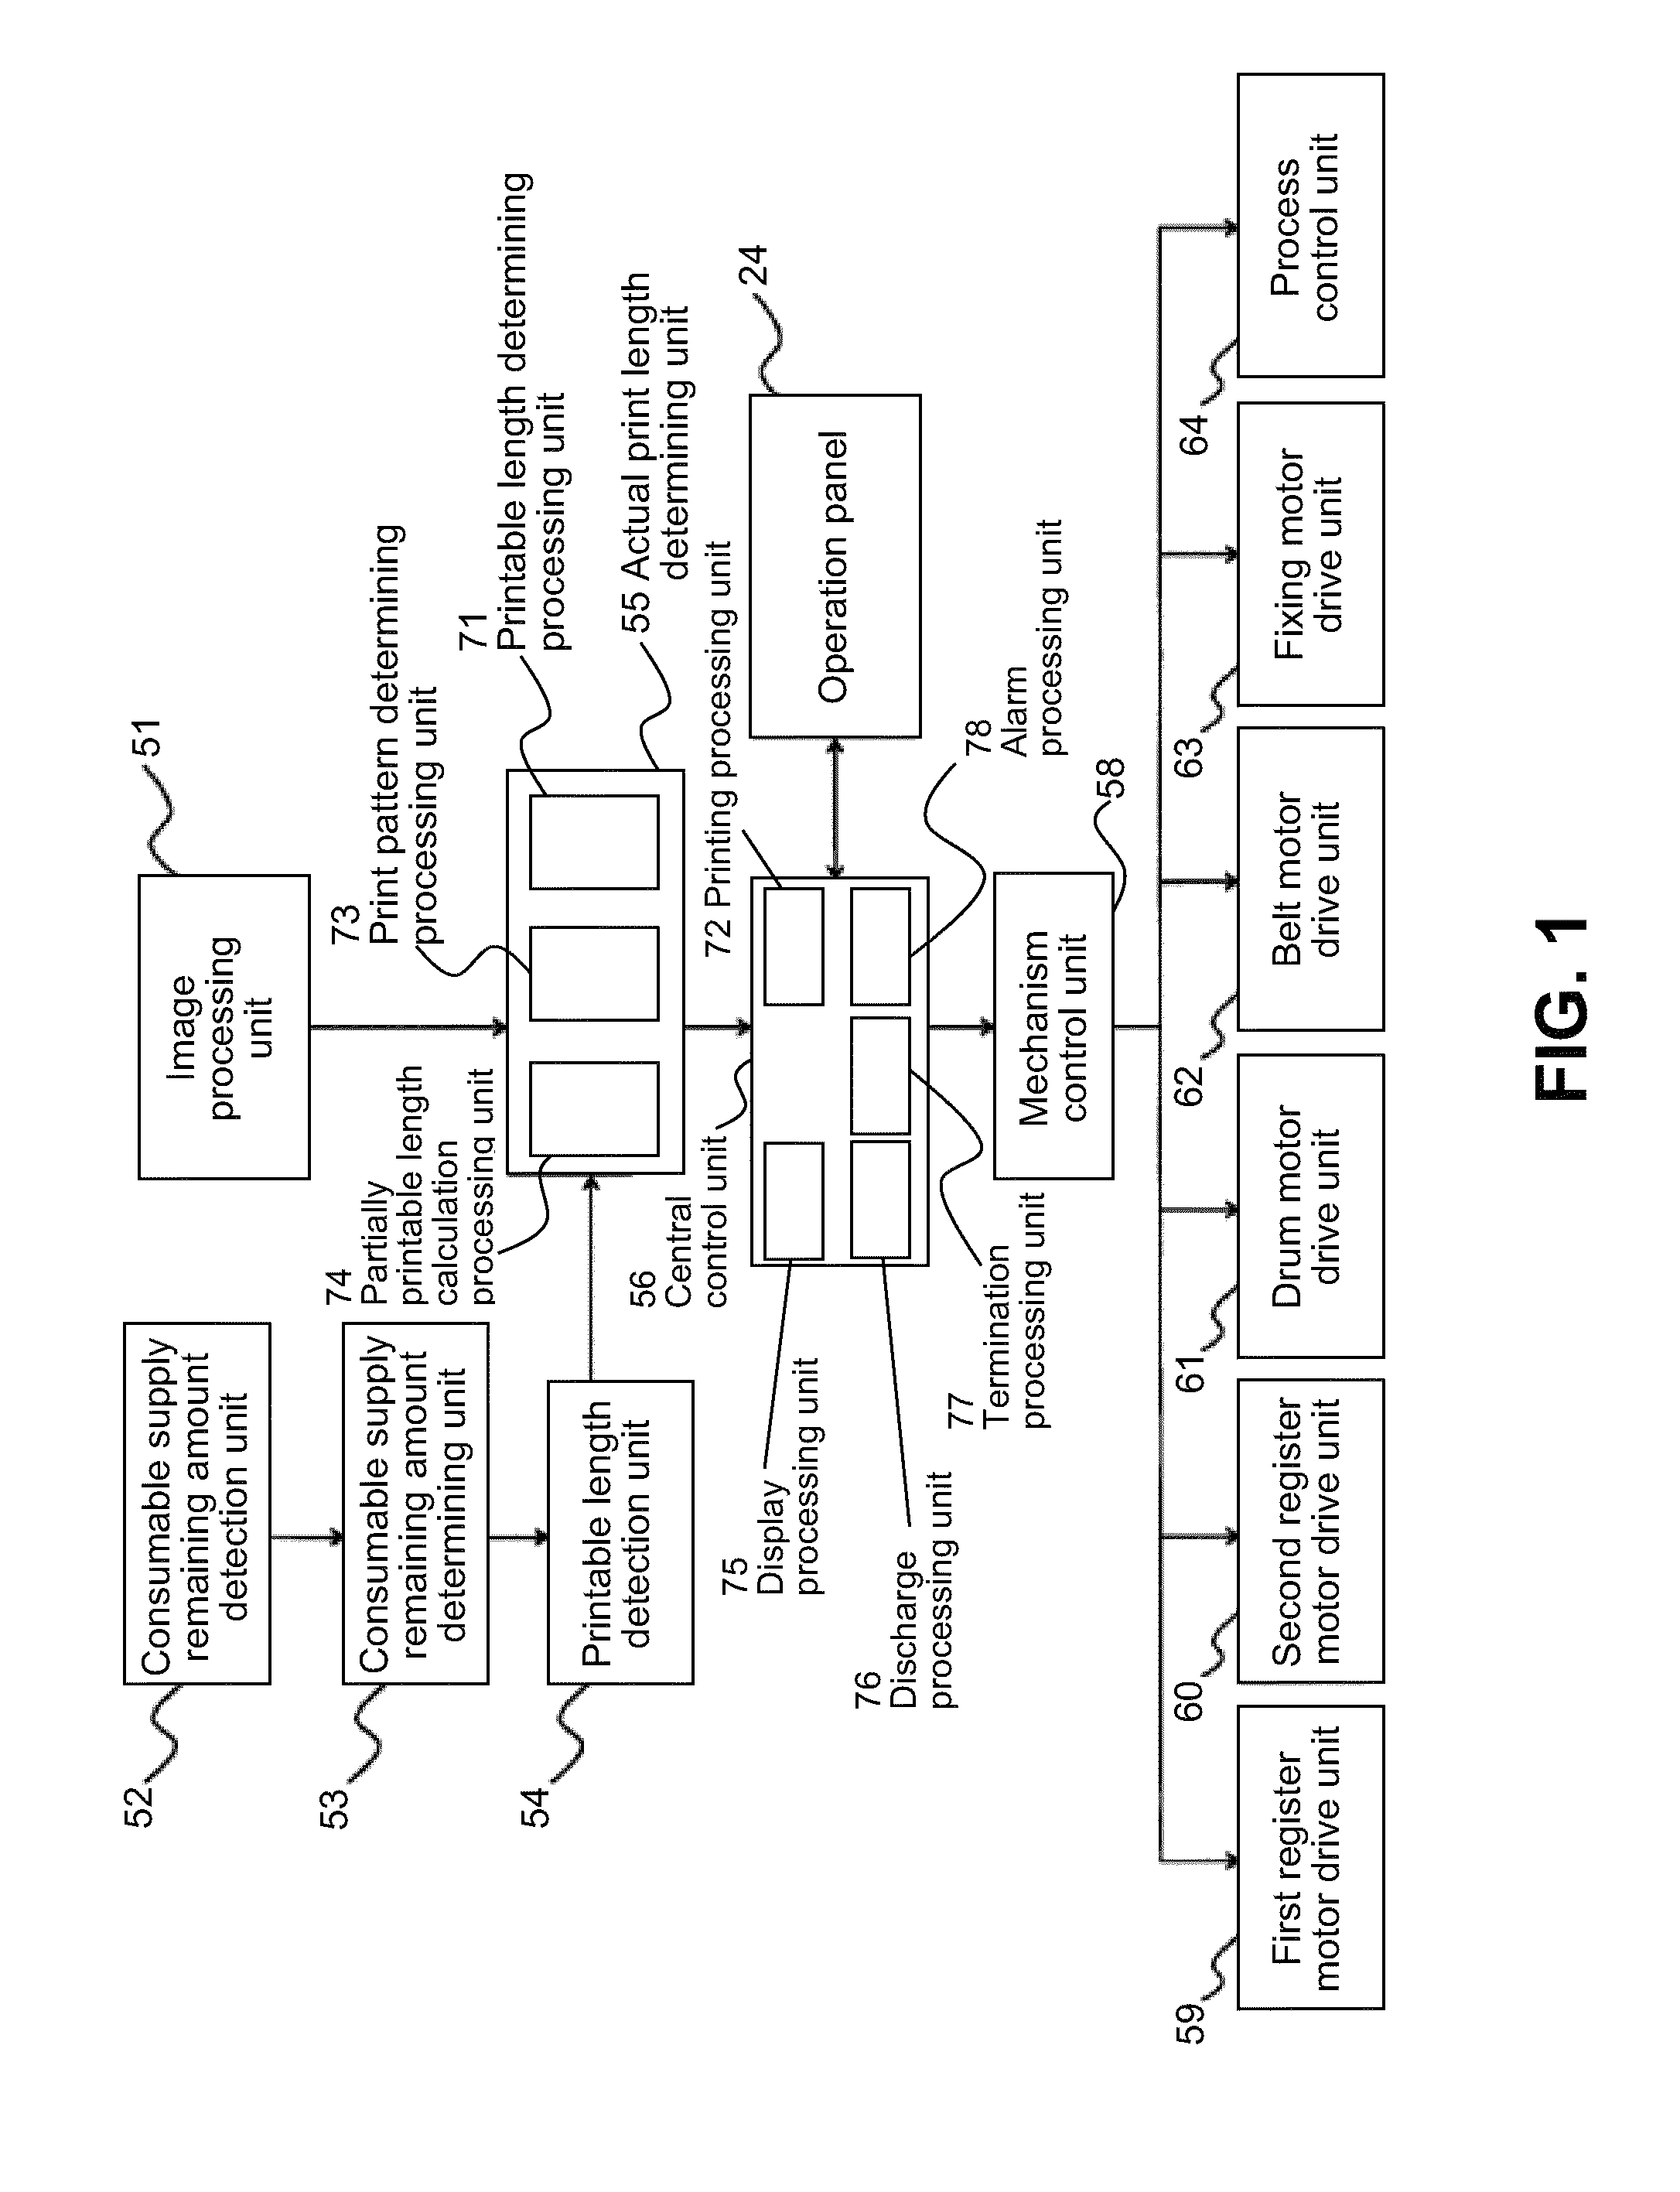 Image forming apparatus with printing processing unit